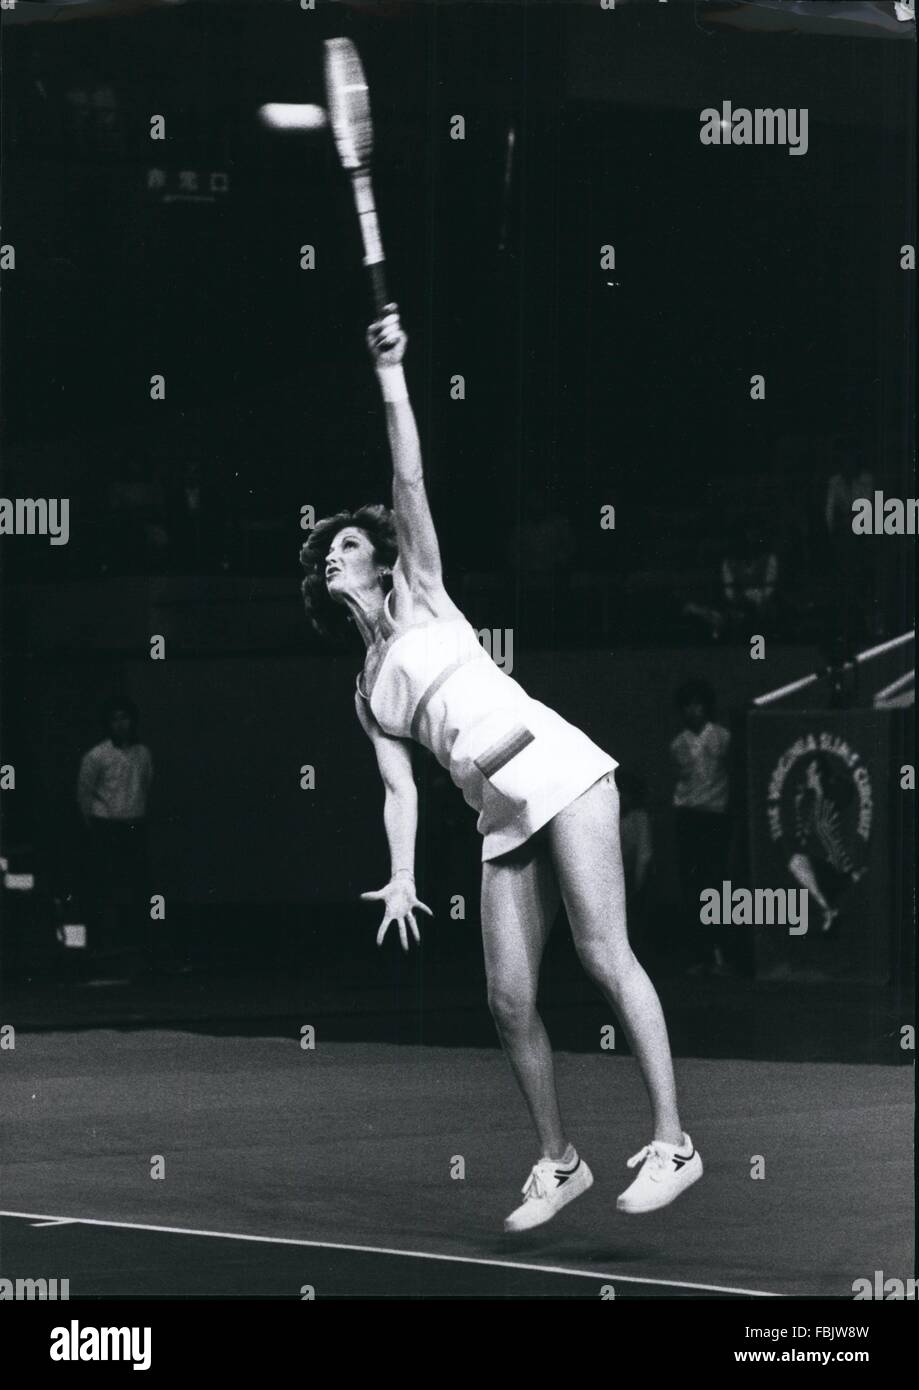 1977 Bridgestone Ladies Doubles Championships The finals of the US00,000 Ladies Doubles Tennis Championships took place in Tokyo on the 9th and 10th April with 16 ladies taking part. The winners were Betty Stove and M. Navratilova who beat Virginia Wade and Francoise Durr in straight sets (7-5, 6-3) to take the first prize of 6,000. Billy Jean King, who last year termed with Betty Stove won the championship, had to be content with 3rd place. Playing with Rosemary Casals against M. Jausovec and V. Ruzici they took the match in straight sets (6-2, 6-4). Photo: Kristien Shaw serving during one of Stock Photo